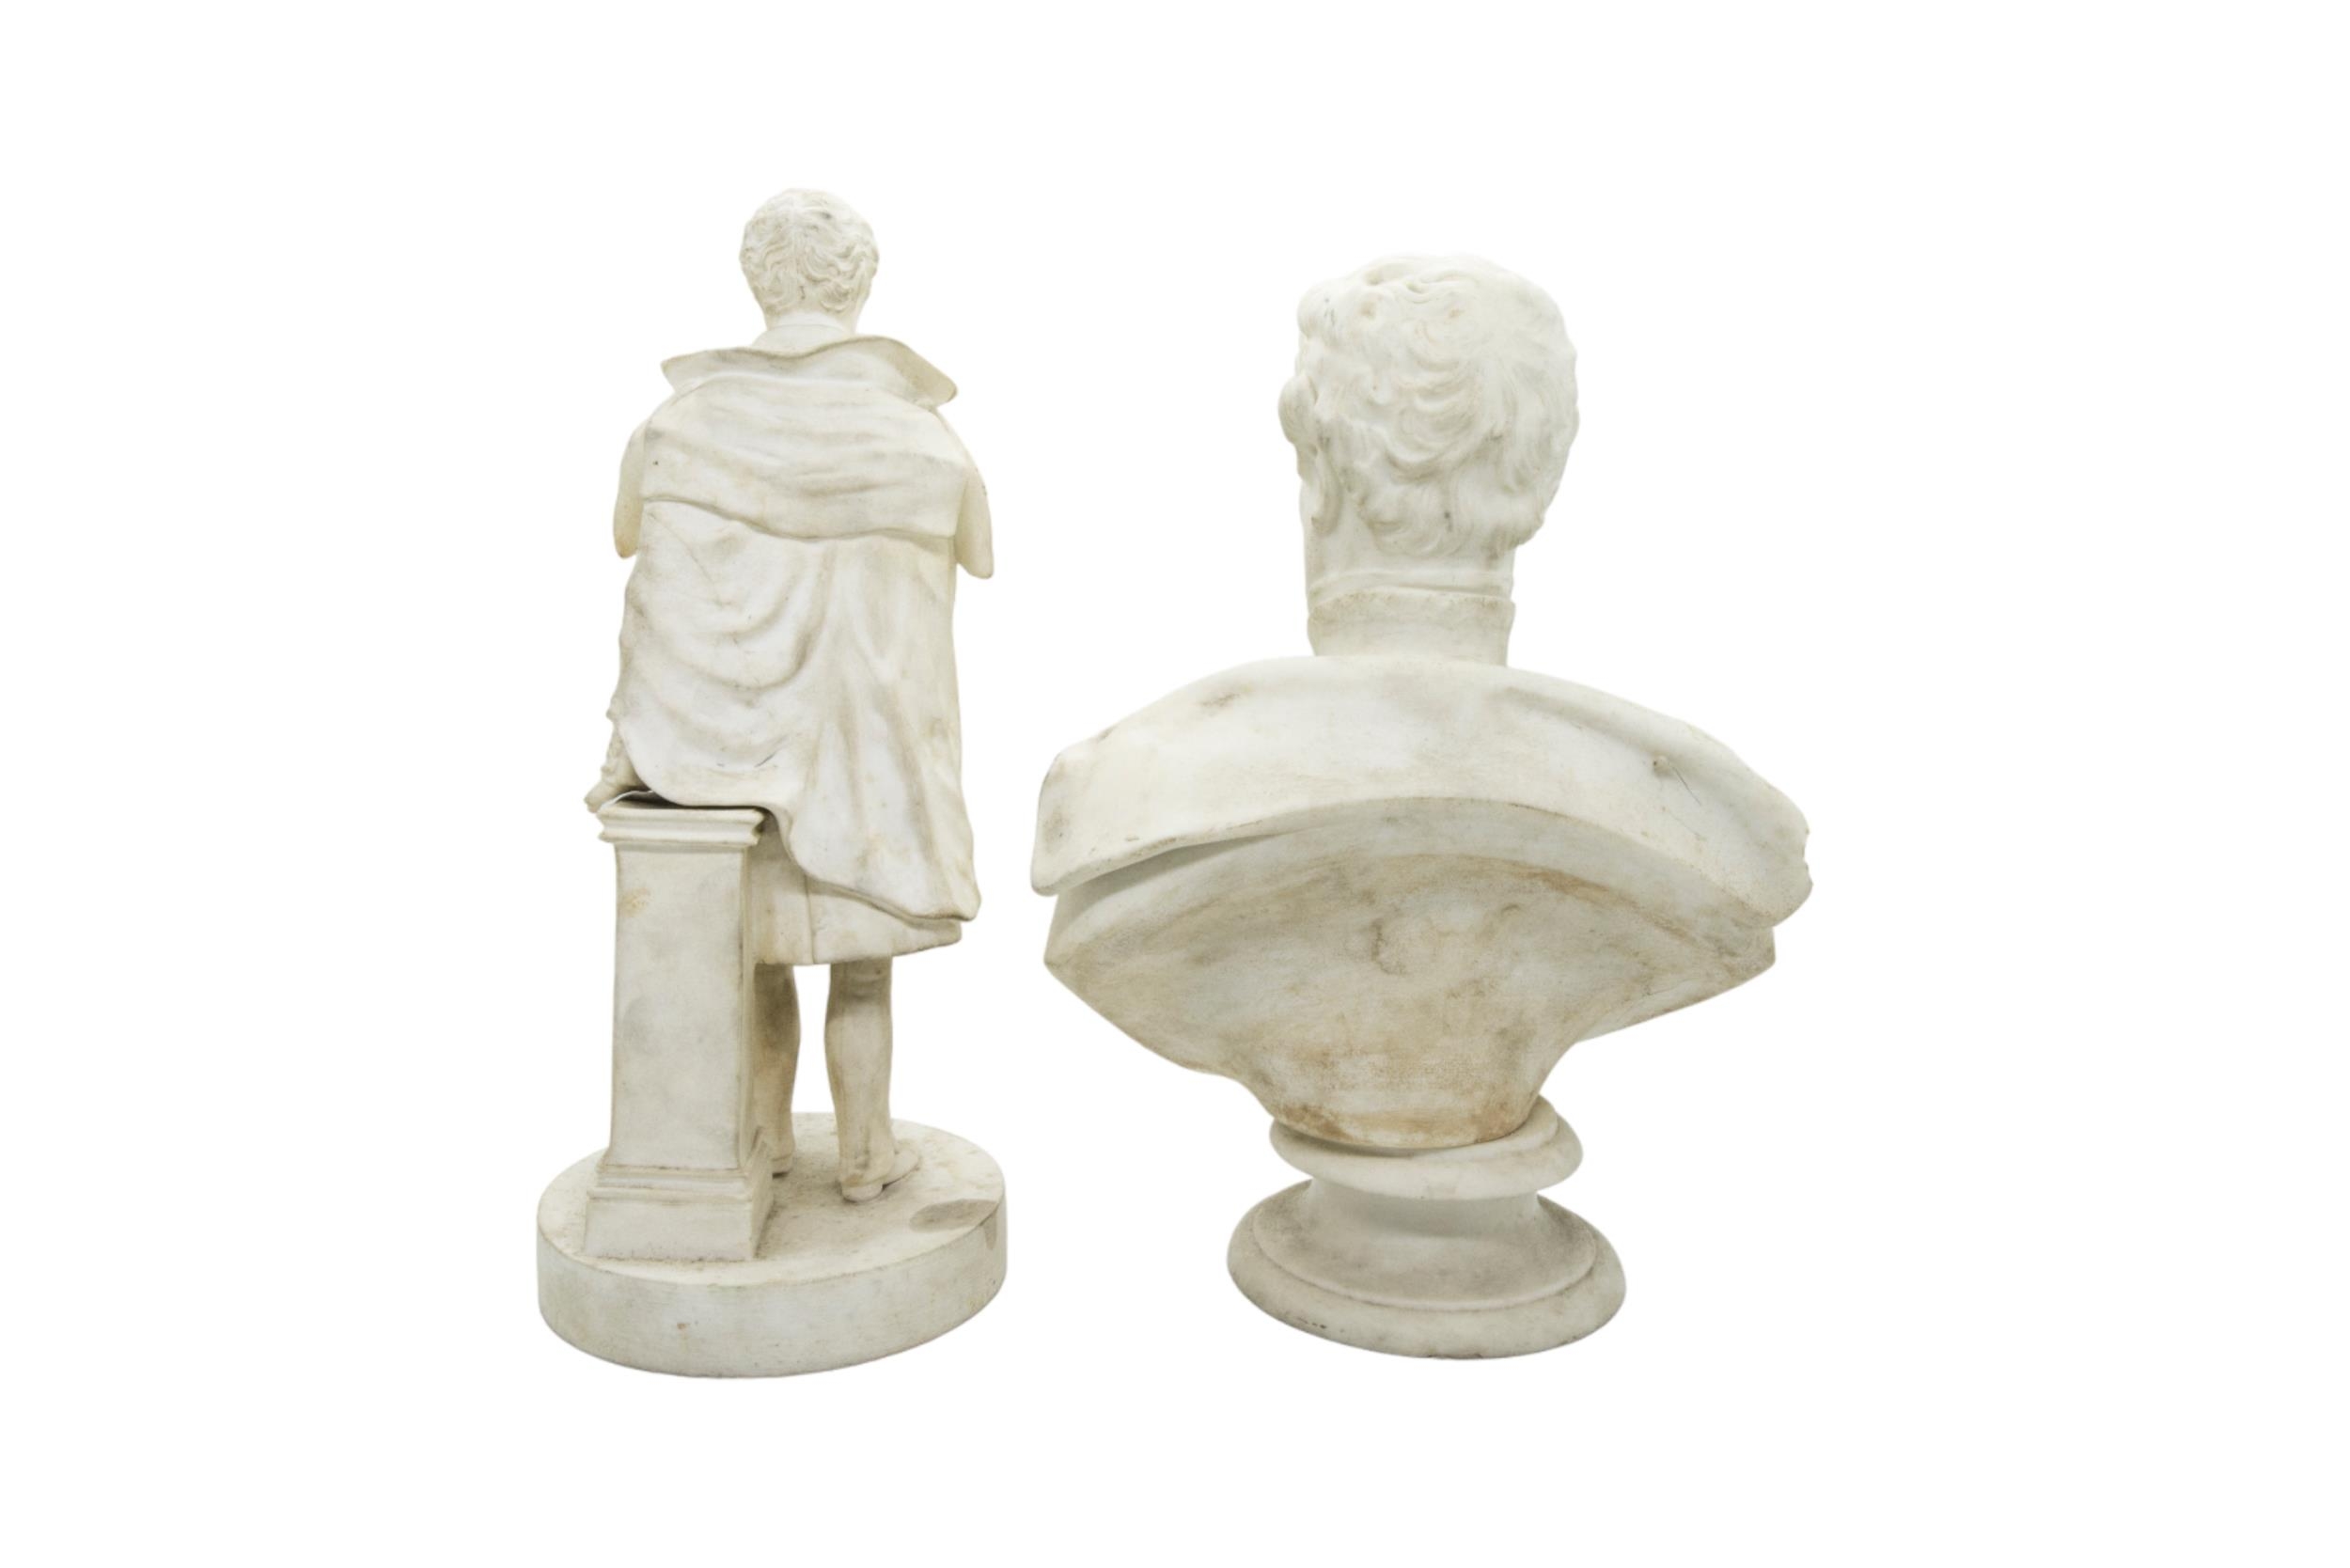 A PARIAN FIGURE OF WELLINGTON 19th century, 27cms, together with a bust of Campbell, a small neo- - Image 3 of 5